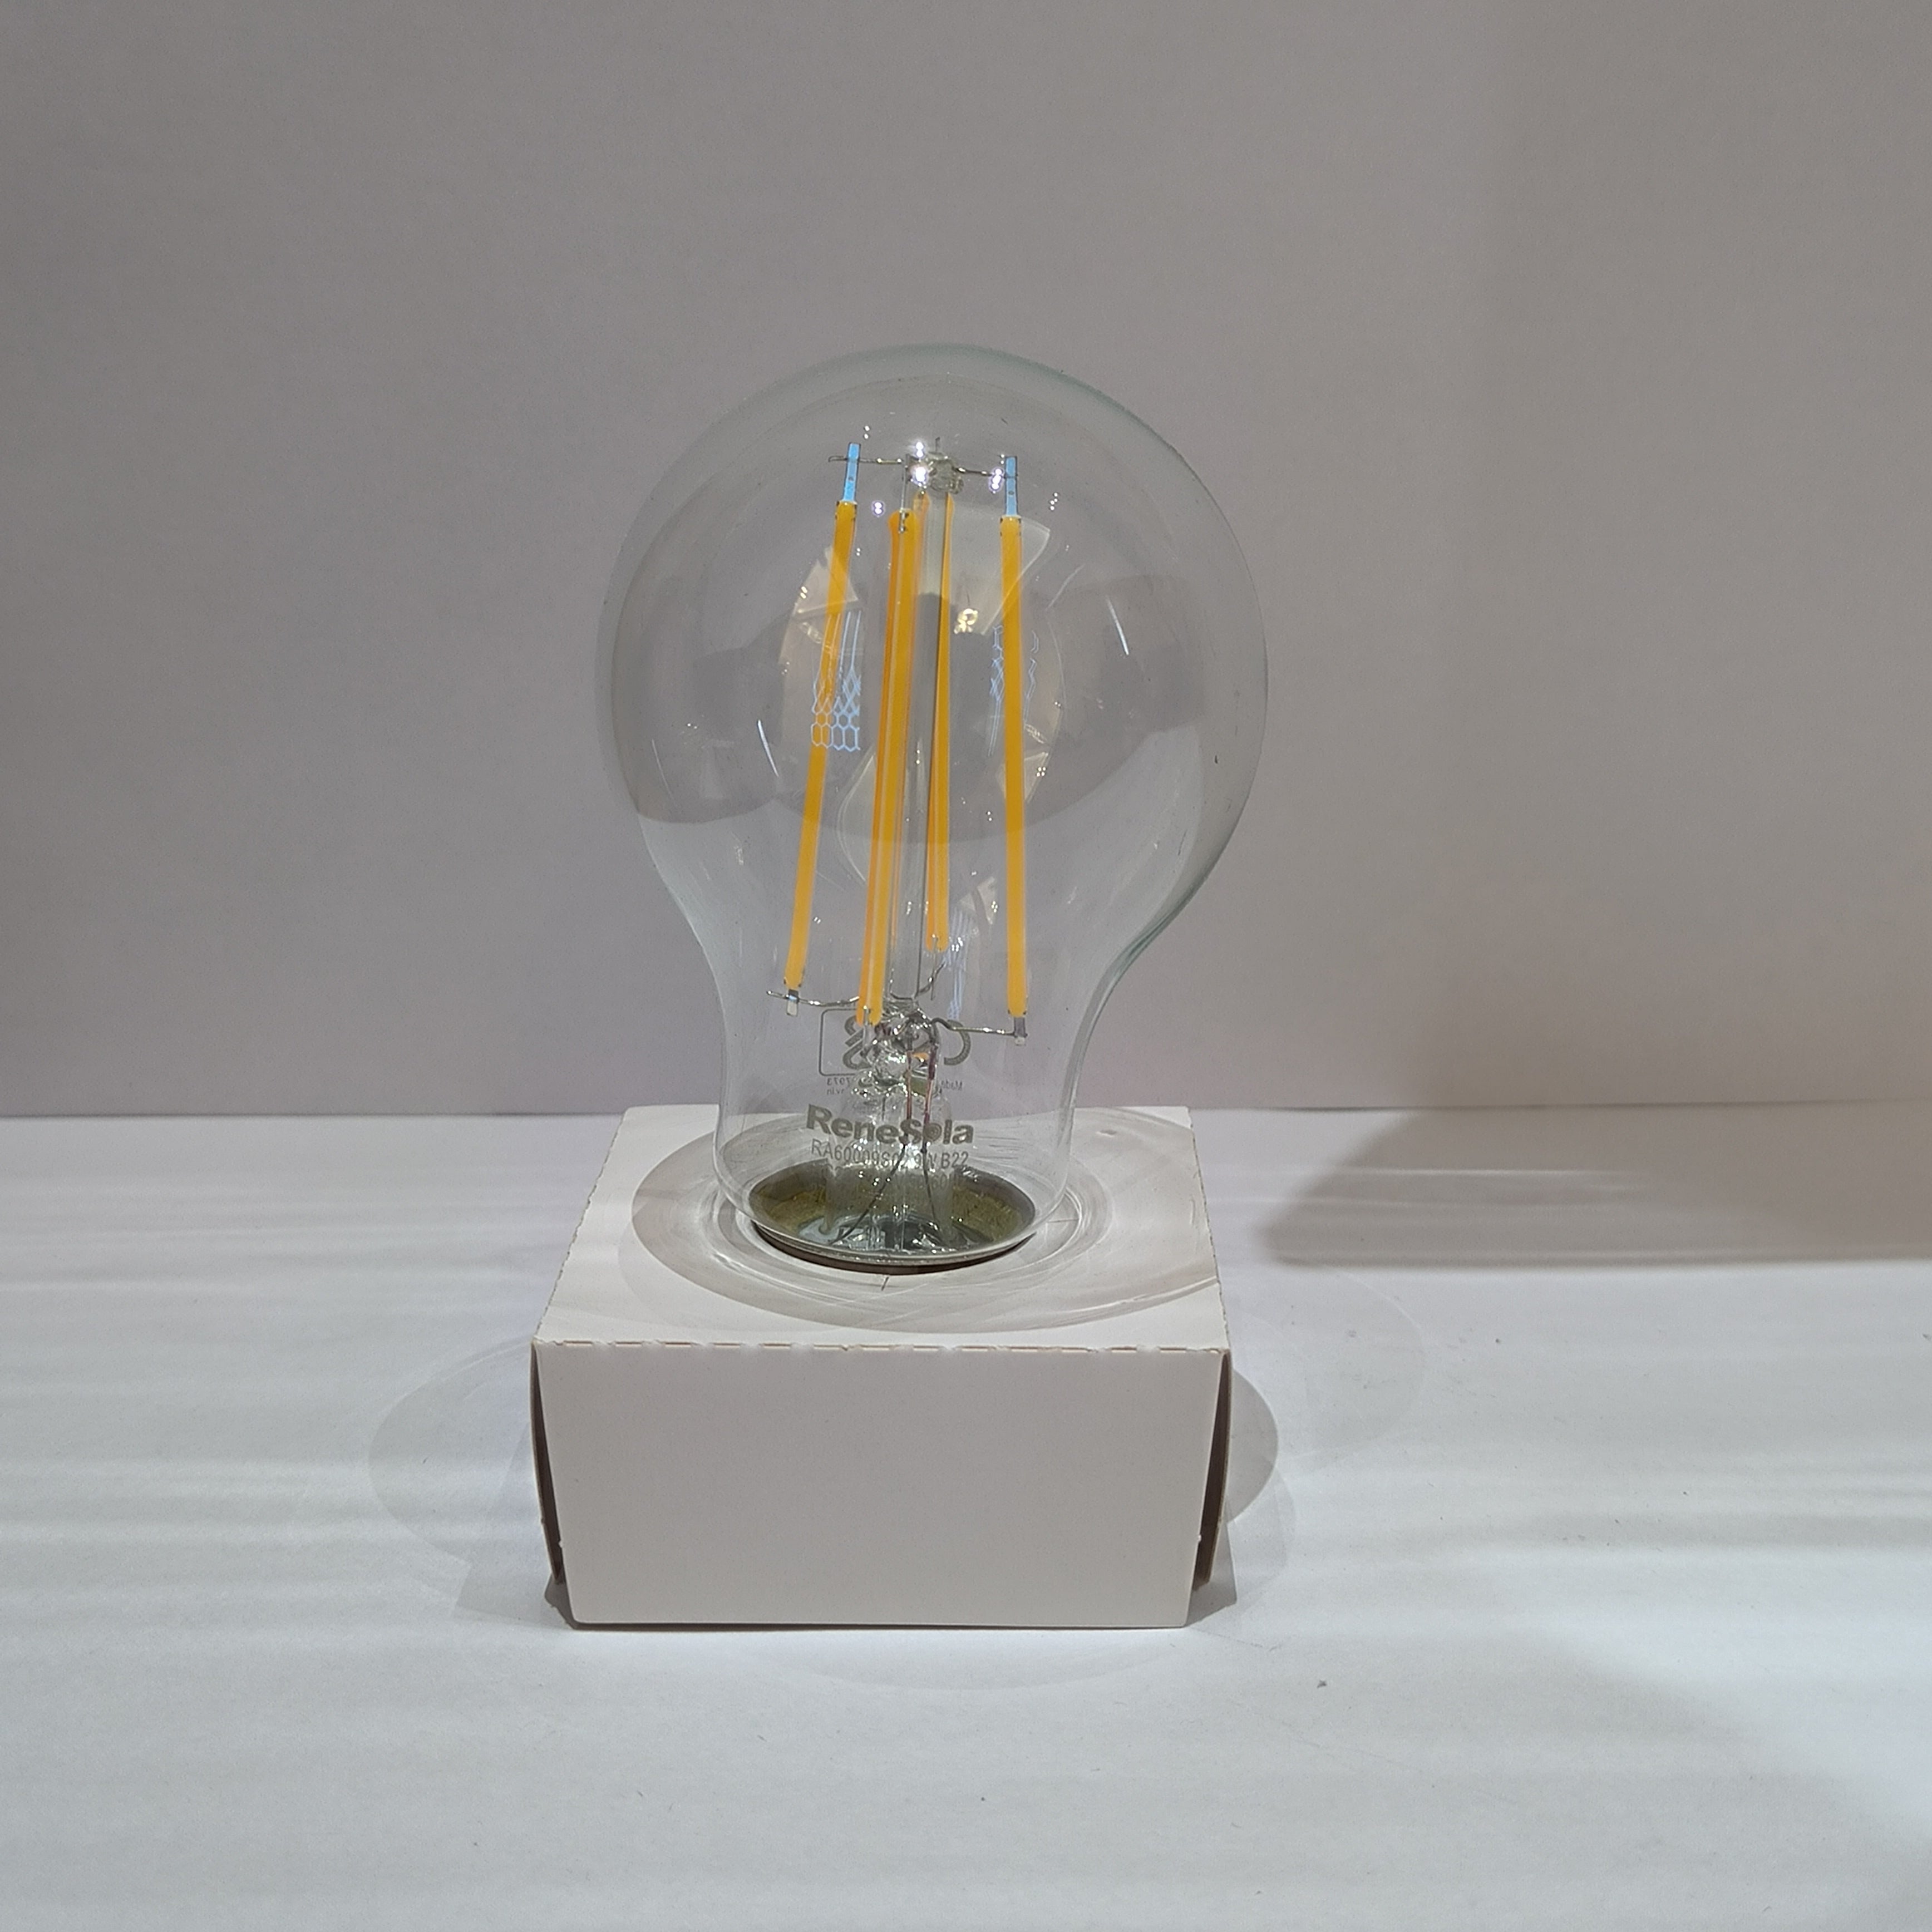 The Best Price on Renesola 9W LED Filament Bulb: Round Shape, B-22, Renesola Color